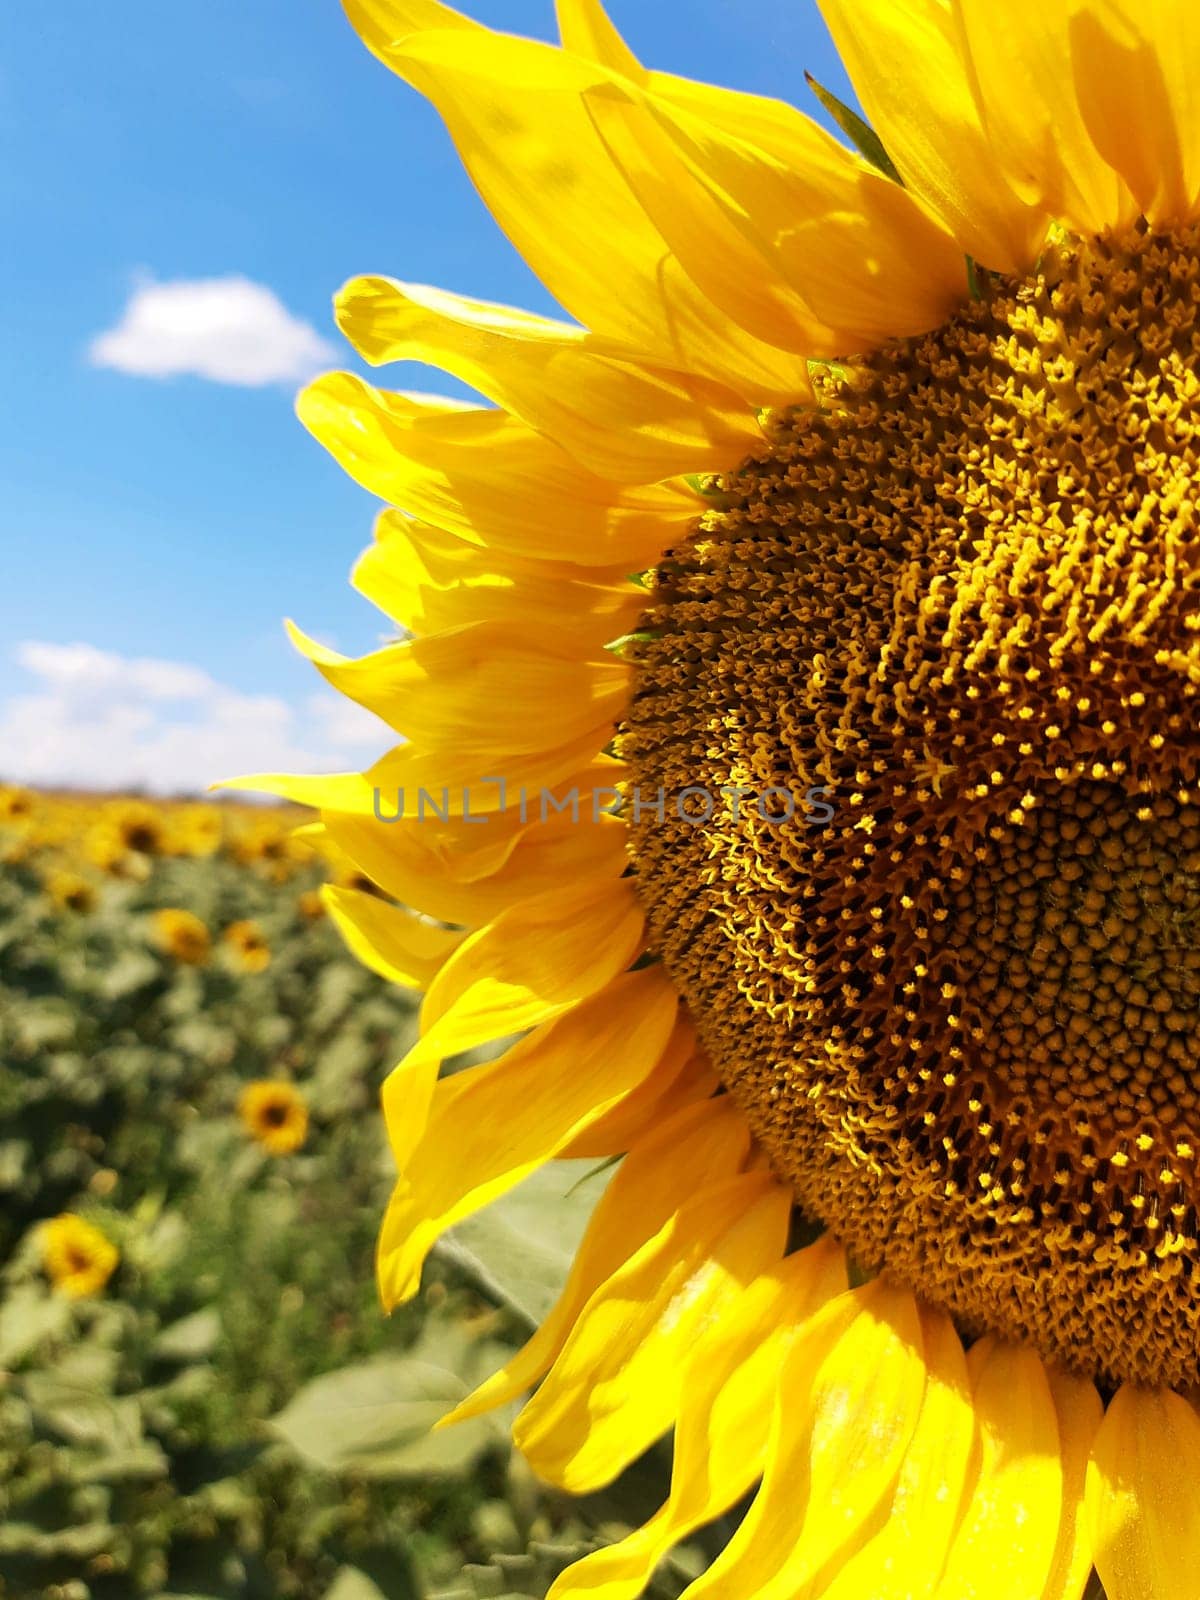 Sunflower head against the background of a field of sunflowers and blue sky close-up by Endusik